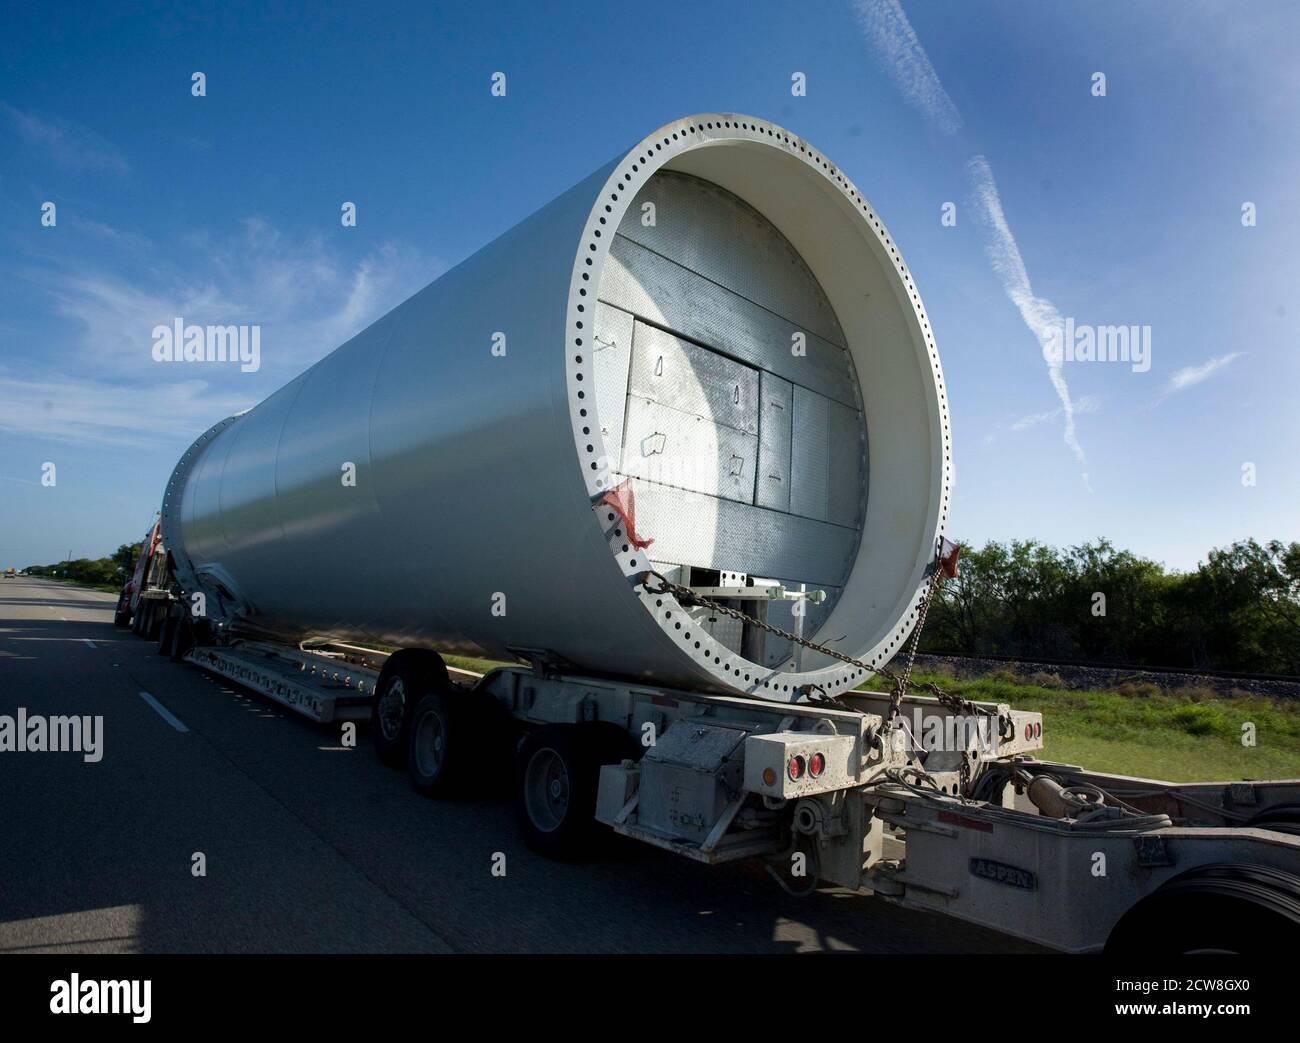 Rivera, TX. August 1, 2008: A steel support piece for a large wind turbine rides on the trailer of a truck on Highway 77 in south Texas. New wind turbine sites are springing up all over Texas. ©Bob Daemmrich Stock Photo